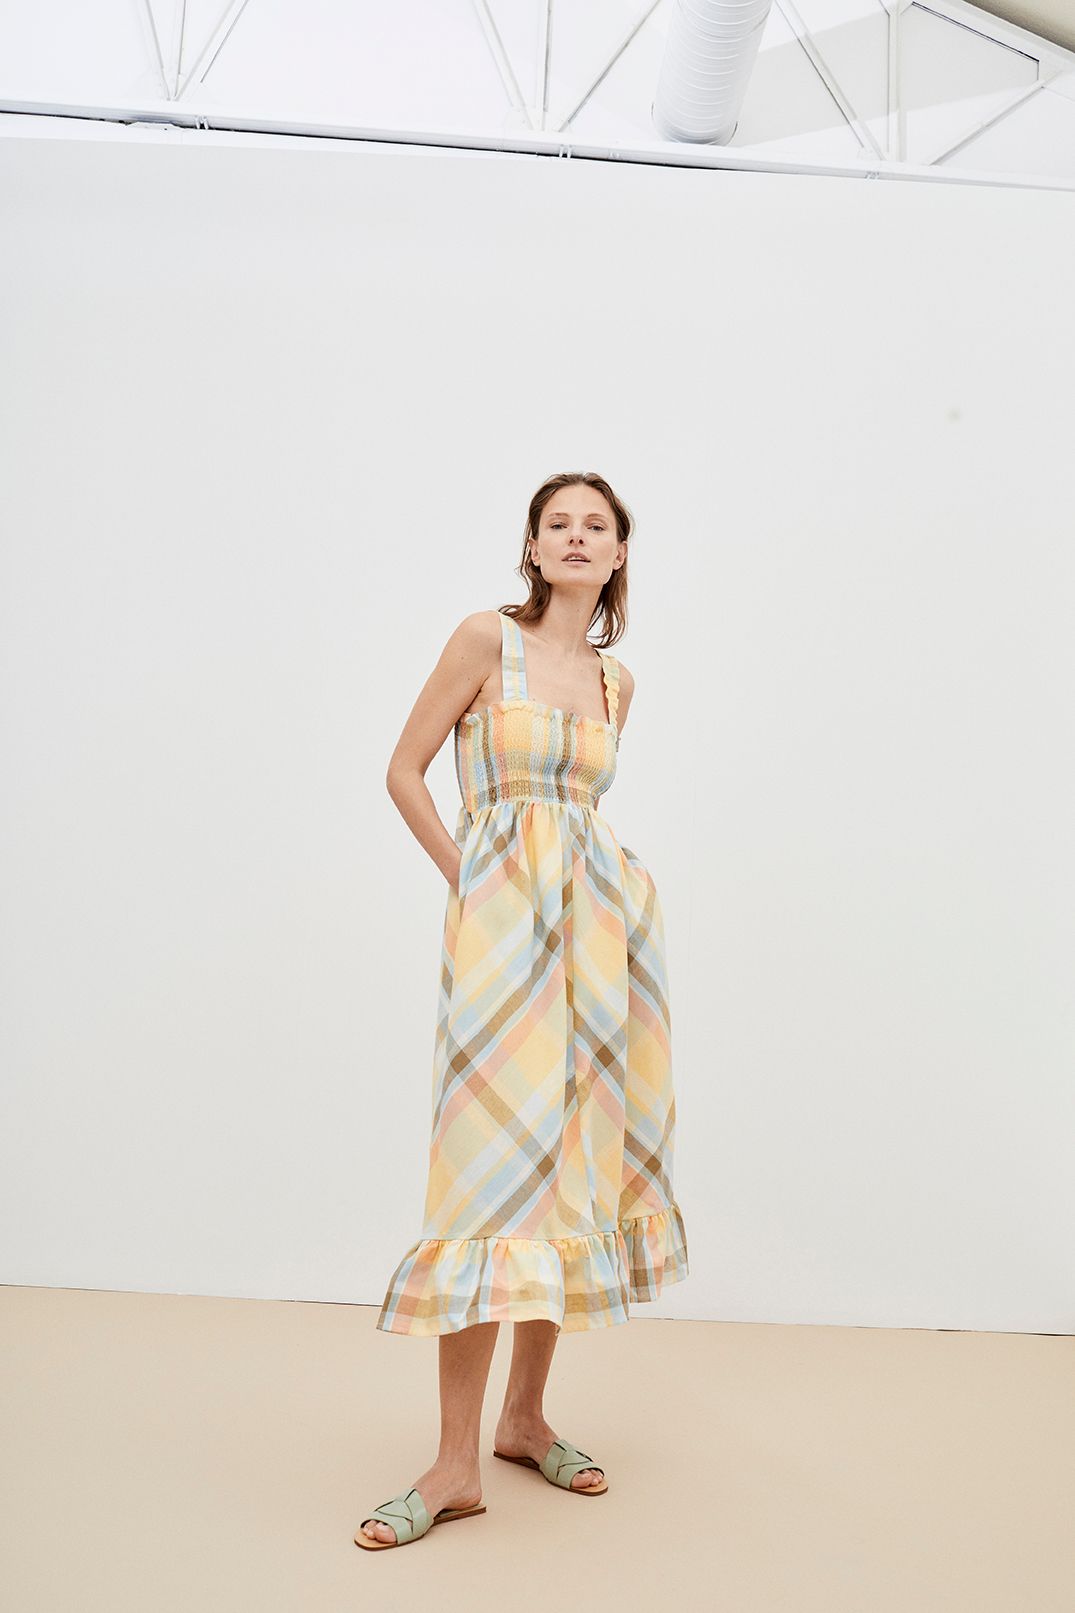 The breathable and lightweight Roberta women's summer dress is a flowy and feminine midi dress in checks. Made in Portugal by The New Society. Roberta's dress is made from lightweight and breathable fabrics for hot and humid weather. Milimilu offers women's dresses online in Hong Kong and Singapore.